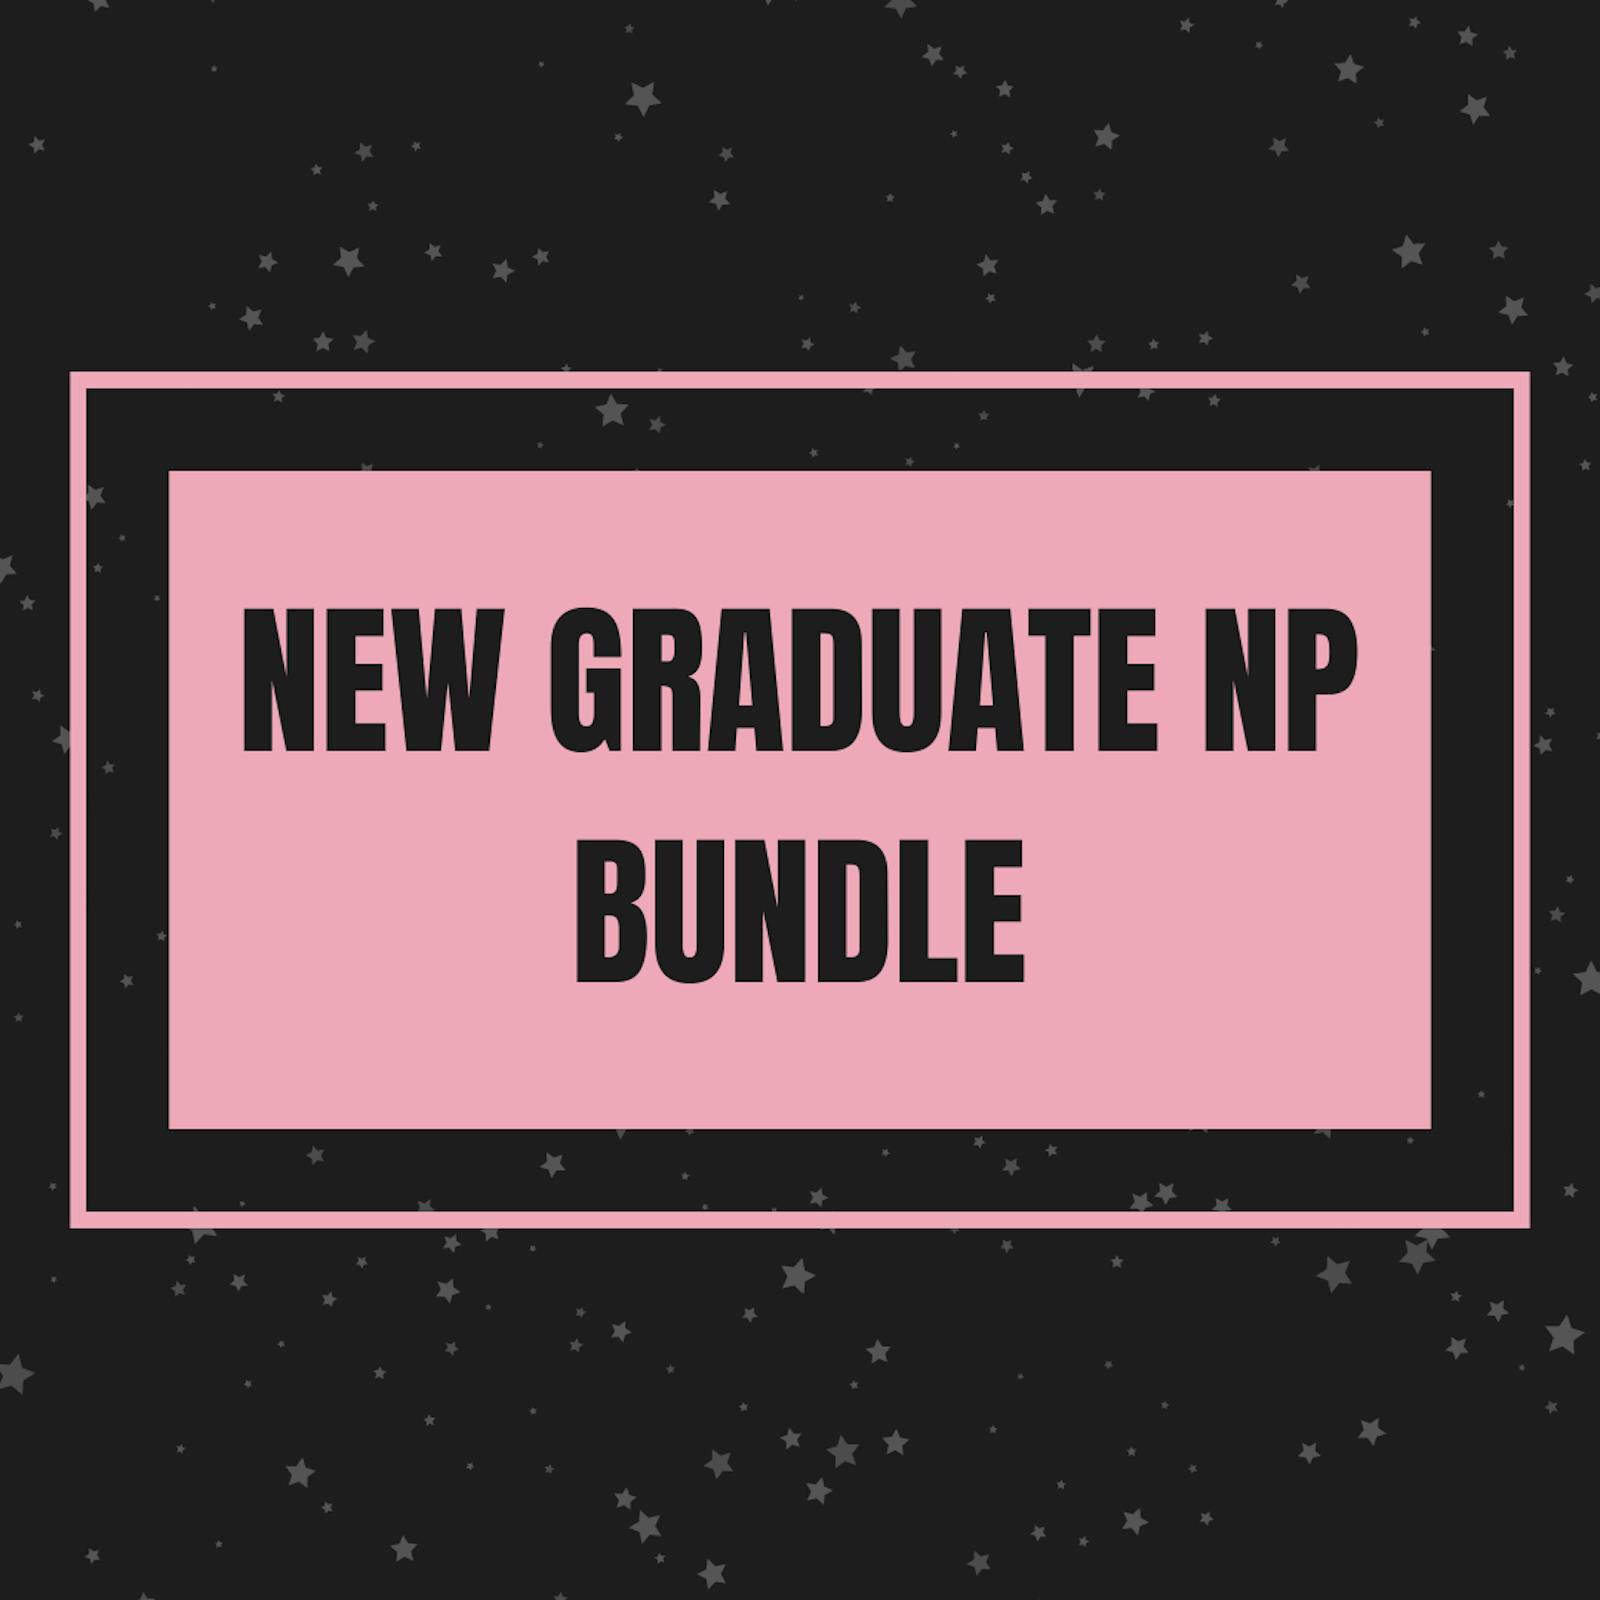 Another popular product! New Grad NP Bundle